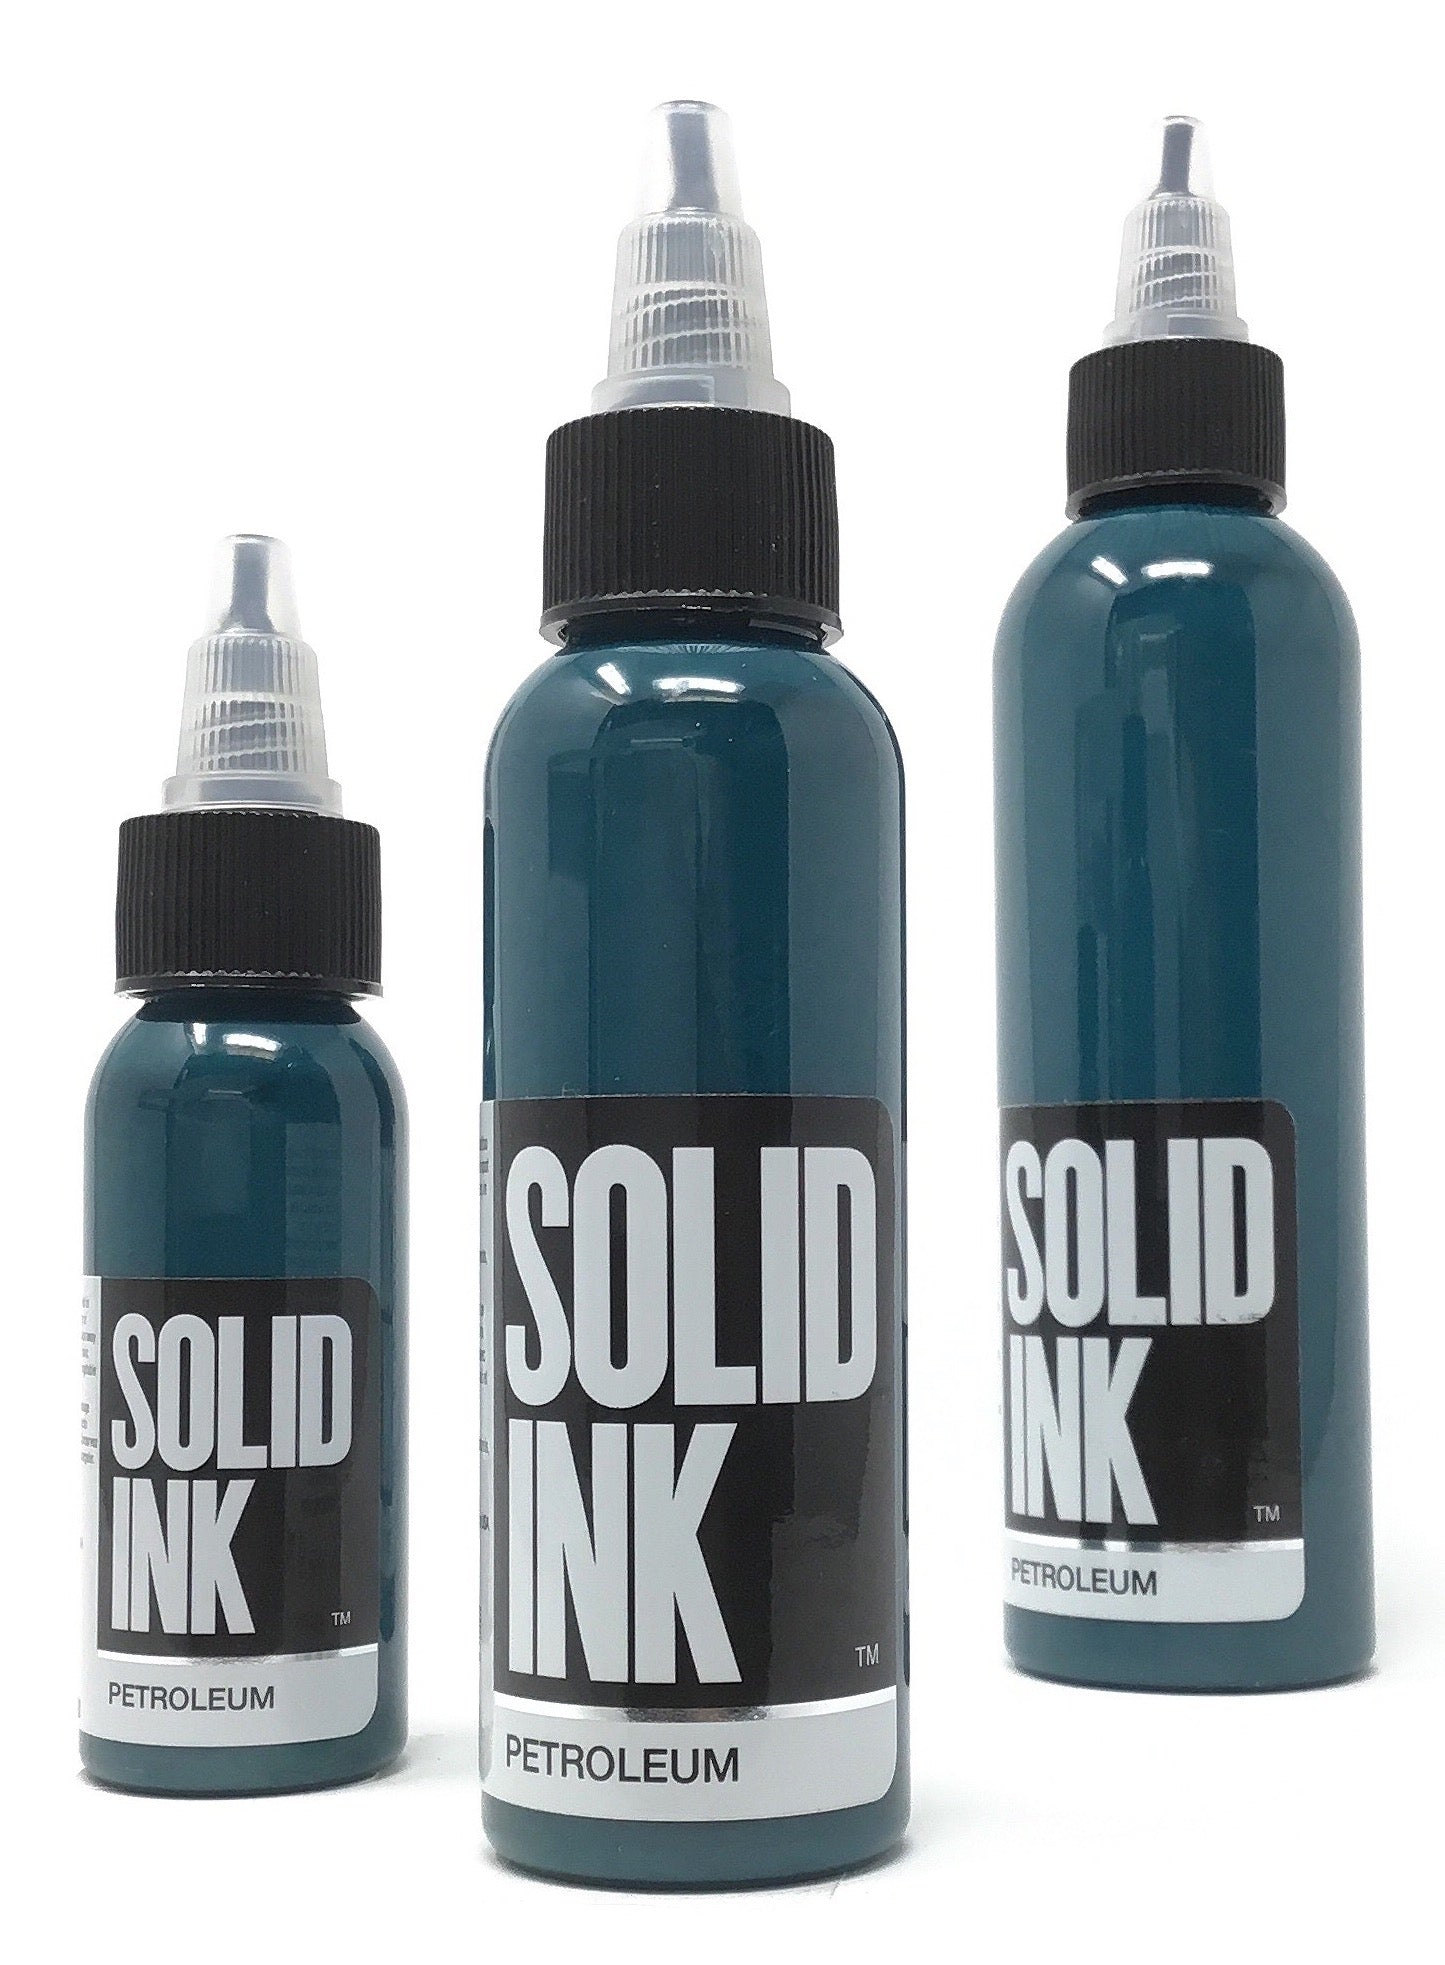 Solid Ink Petroleum Tattoo Ink